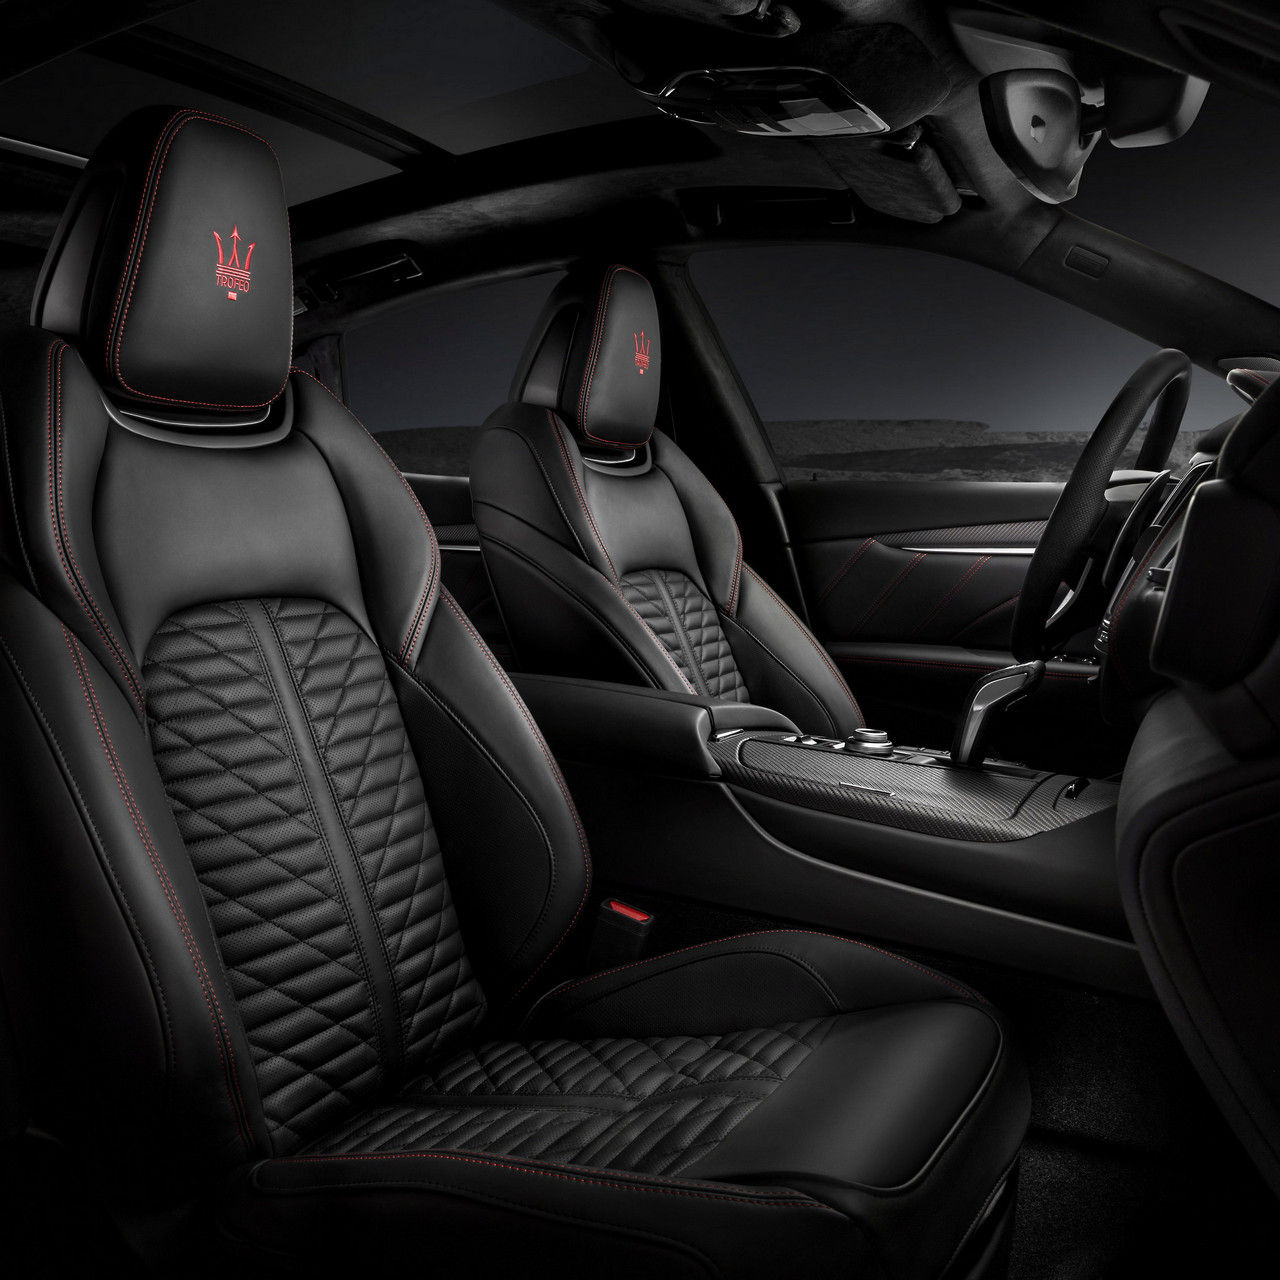 Levante Trofeo interior: black leather sport seats and red stitchings